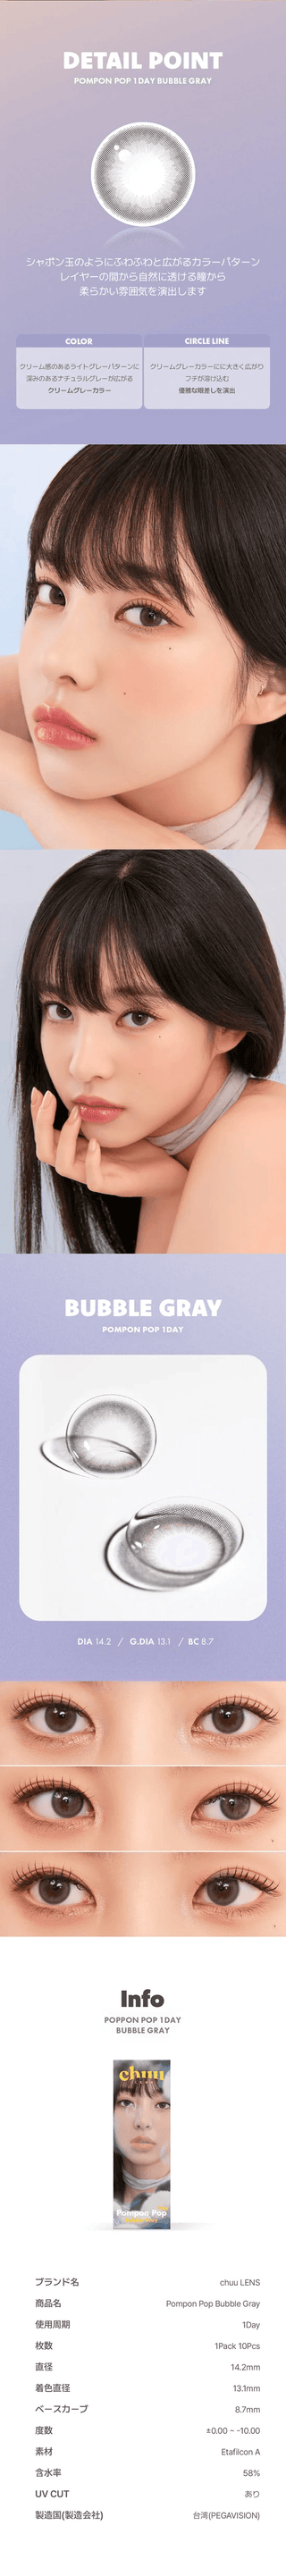 collections of images with the Chuu Pompon Pop Bubble Grey from Eyecandy. The Chuu Pompon Pop Bubble Grey by Eyecandy features text written in Korean on a violet background in the first picture. The second image features an angled view of a stunning young Asian girl who is wearing Chuu Pompon Pop Bubble Grey contact lenses from Eyecandy together with natural makeup to give her a younger, more radiant appearance.